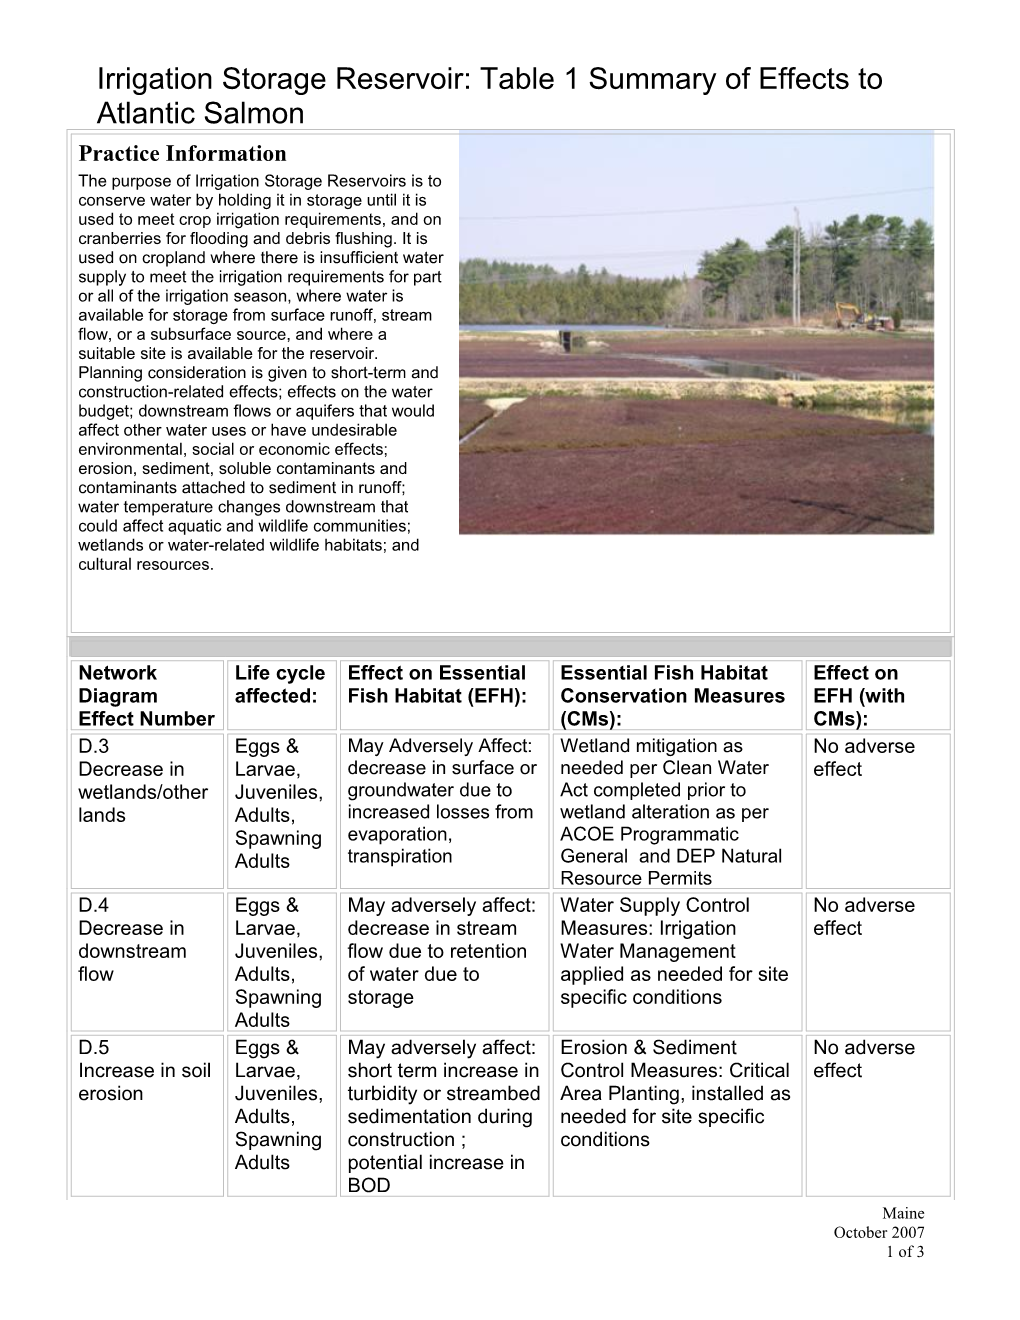 Irrigation Storage Reservoir:Table 1 Summary of Effects to Atlantic Salmon